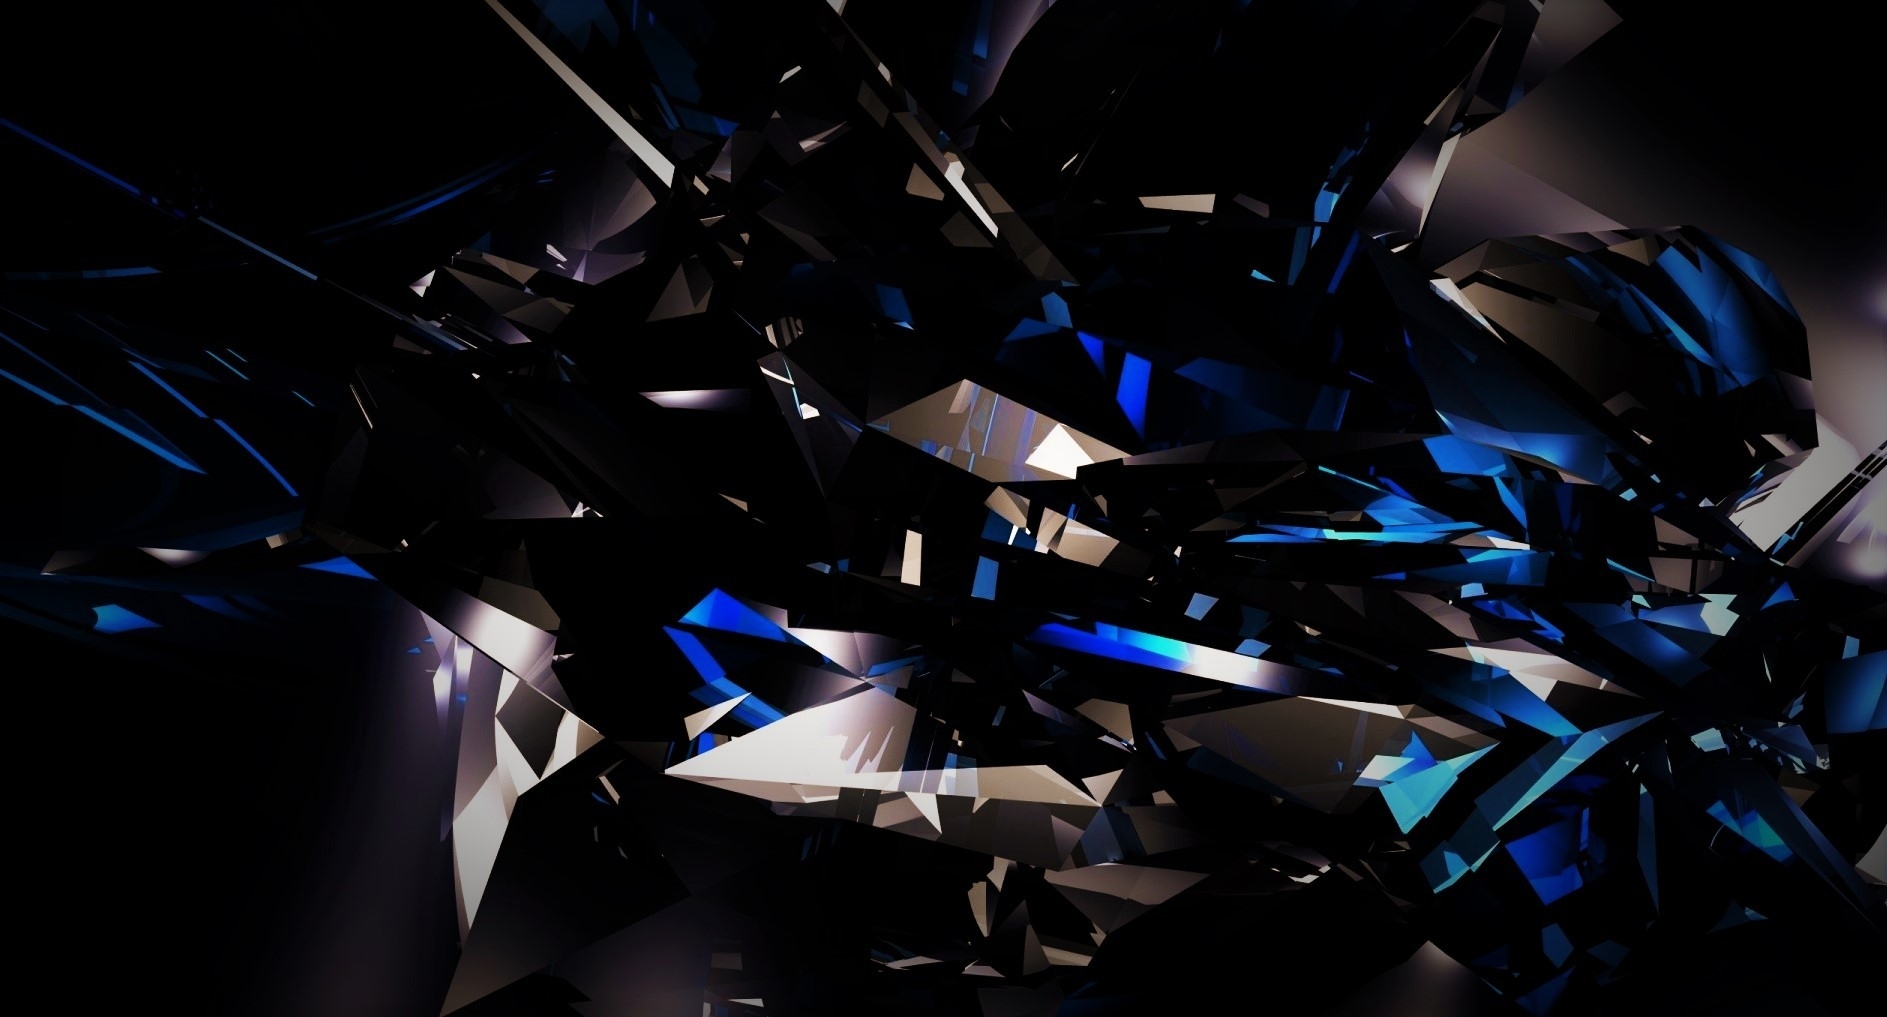 black, dark, abstract, 3d, shards, glass, blue, bright wallpapers hd